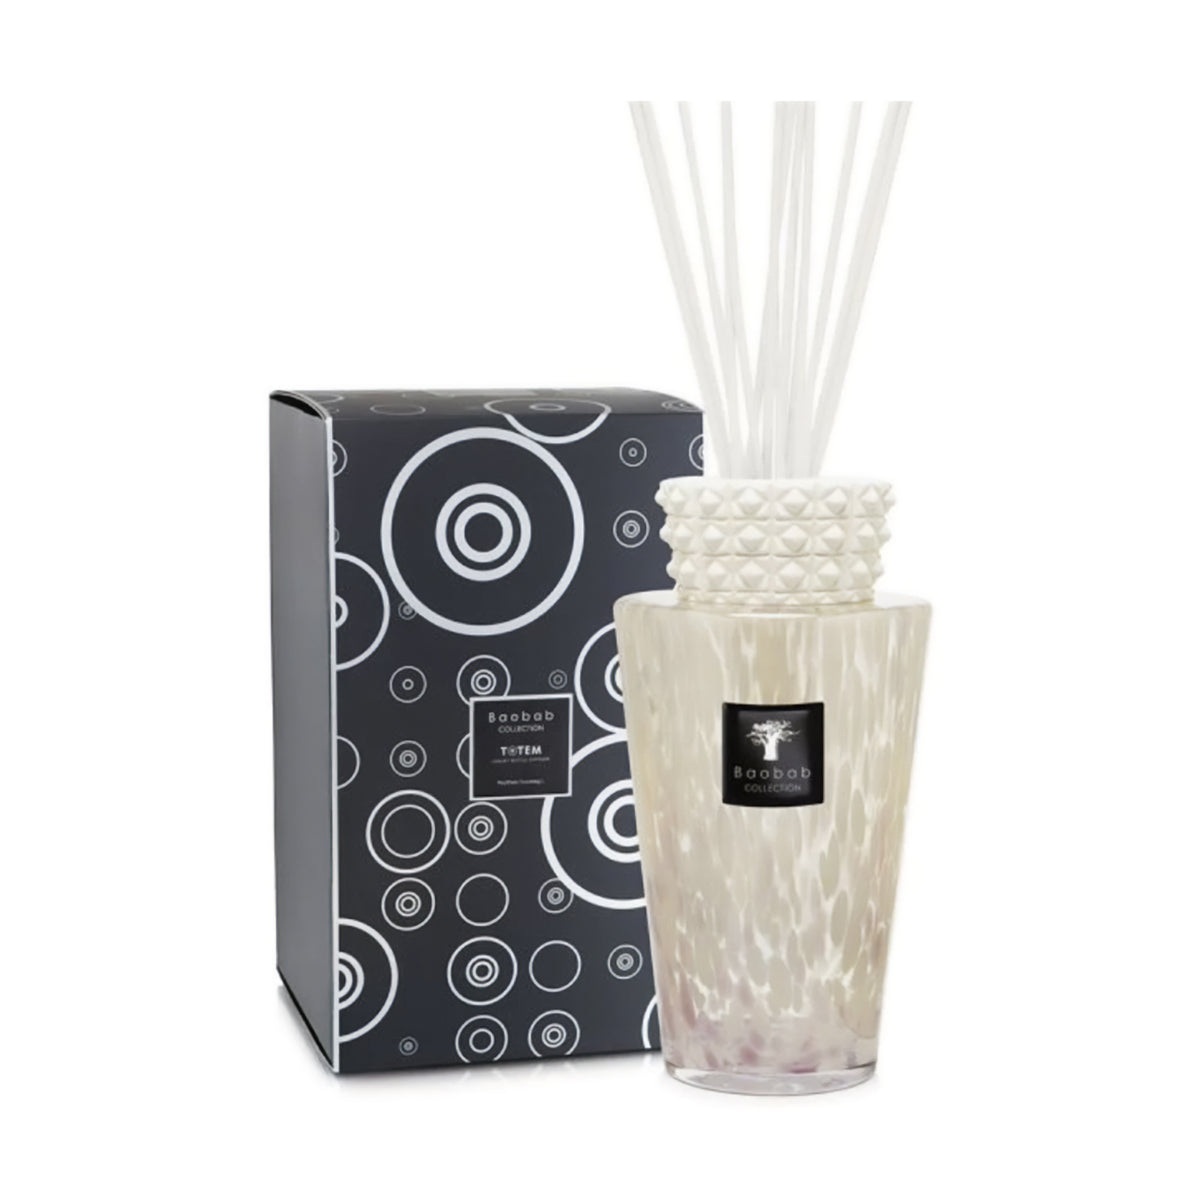 WHITE PEARLS LUXURY LARGE 5L DIFFUSER